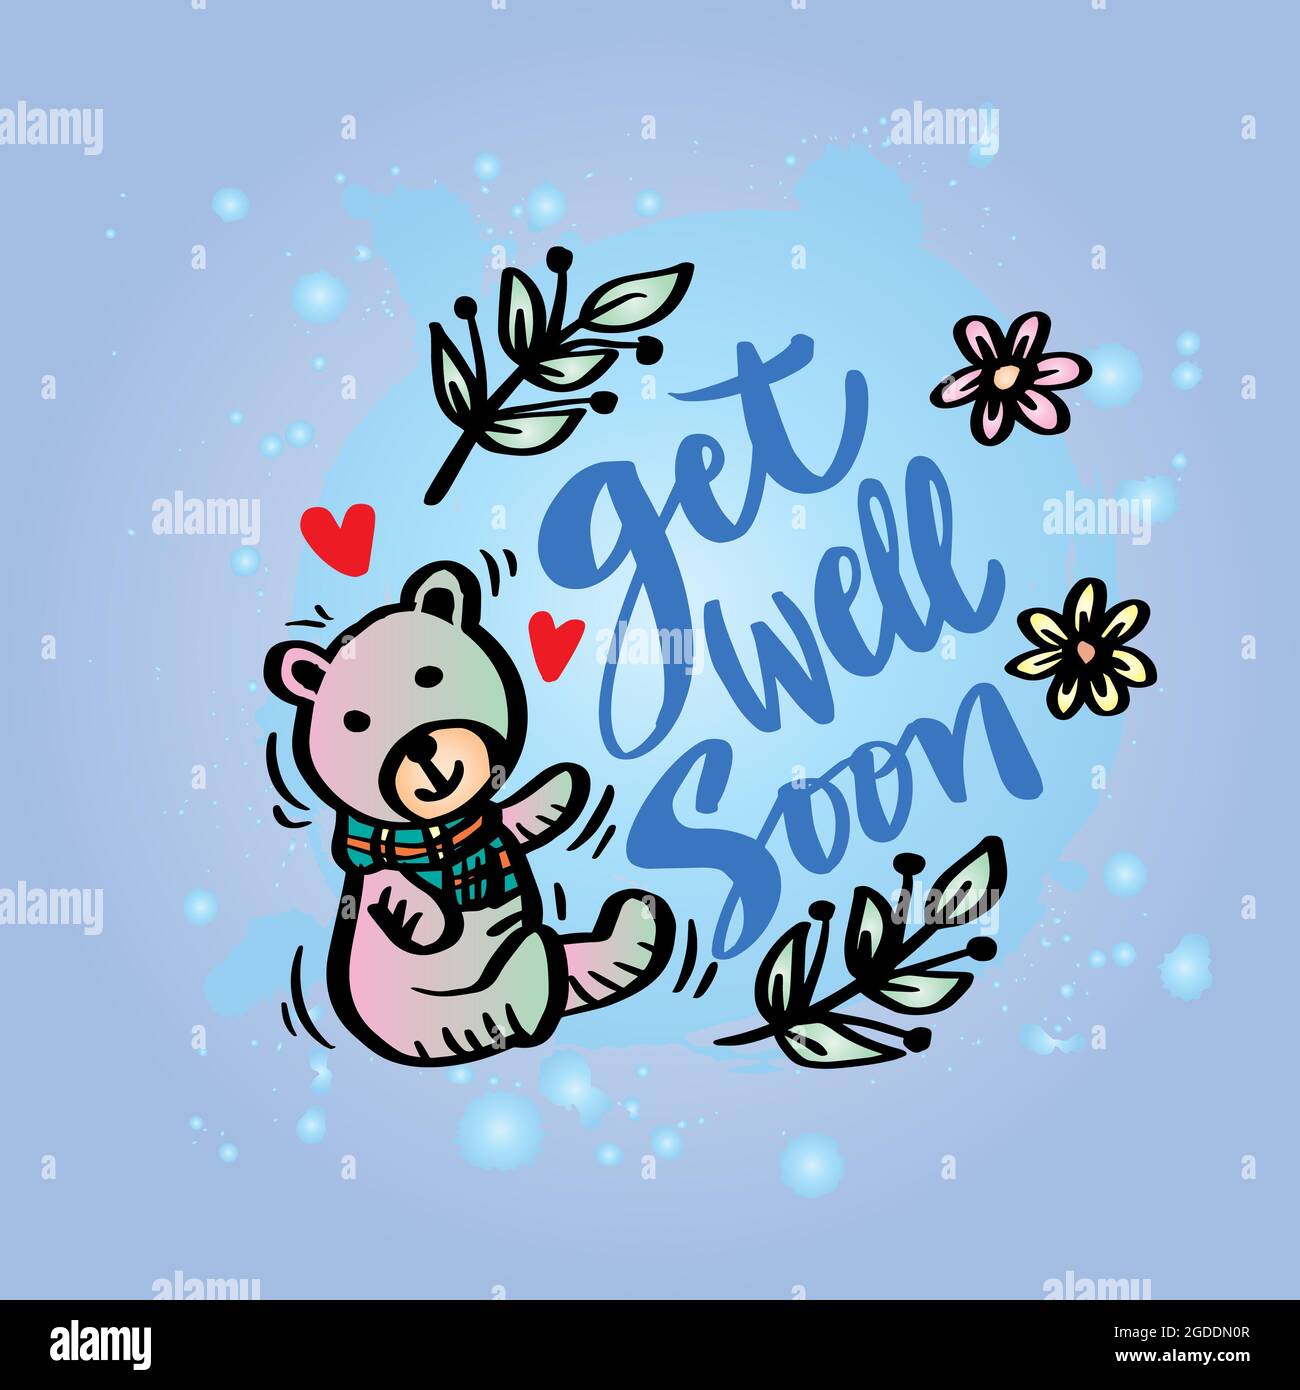 Get Well Soon Hand Lettering With Teddy Bear. Motivational Quote